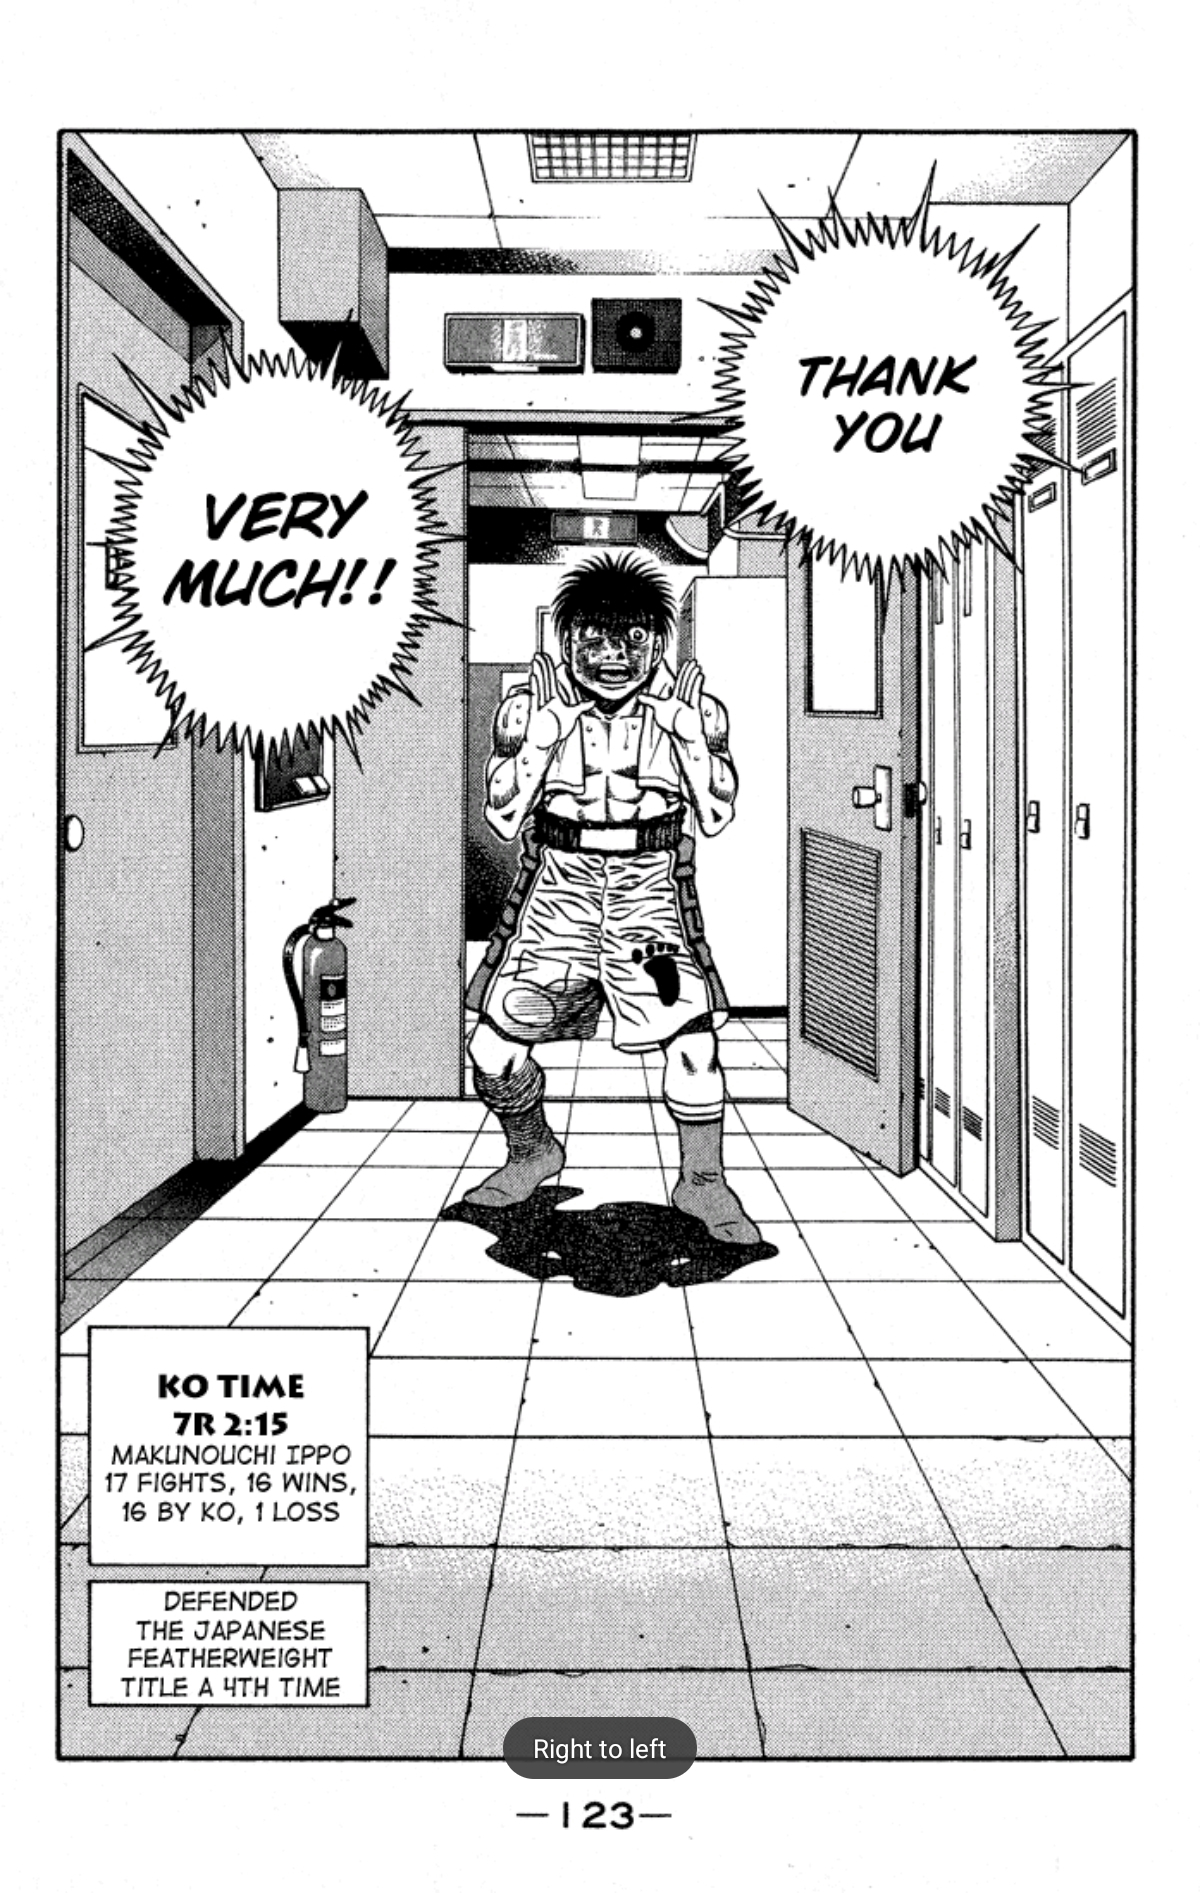 Ippo shouts towards the frame, down a hallway: Thank you very much! His record is 17 fights, 16 wins, 1 loss. 